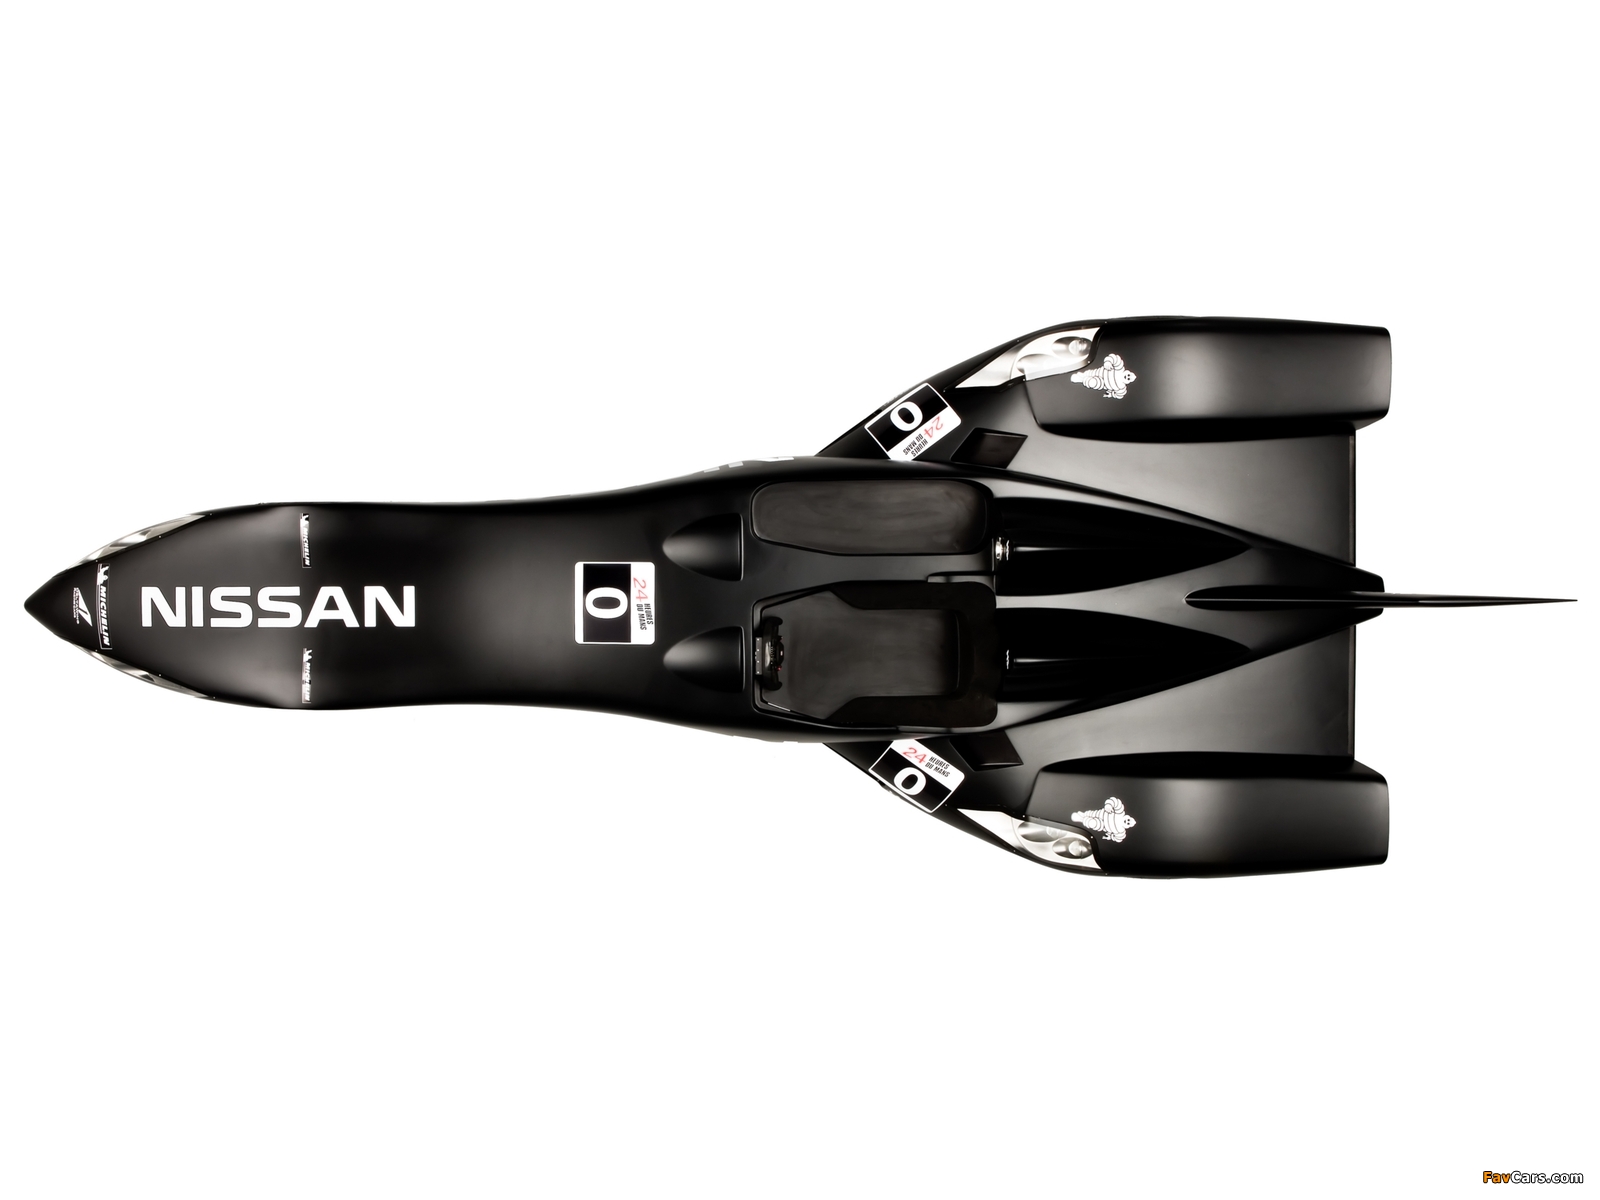 Nissan DeltaWing Experimental Race Car 2012 wallpapers (1600 x 1200)